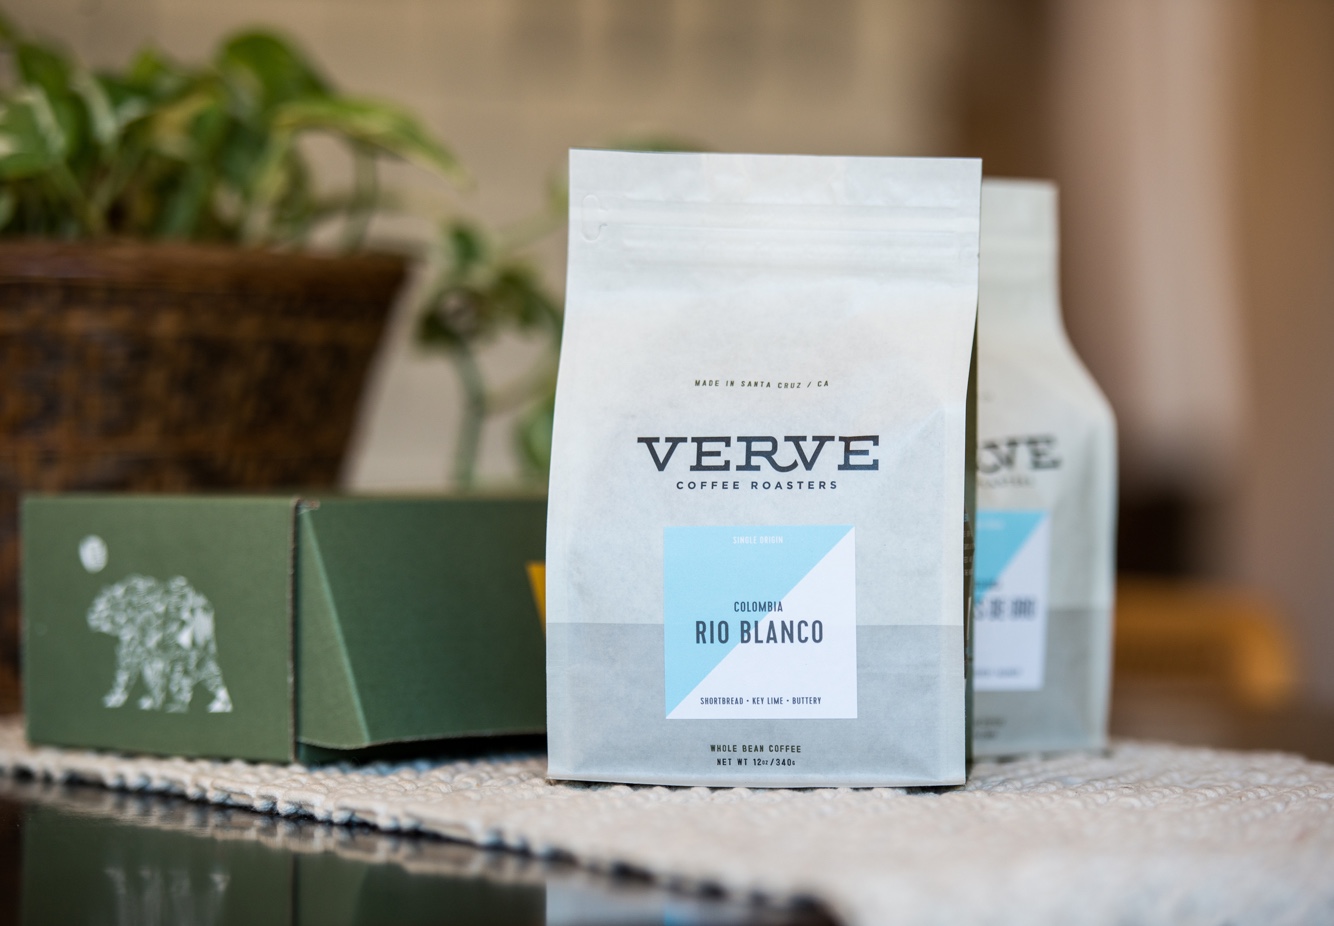 Verve Coffee doubled subscriber growth with a custom checkout flow